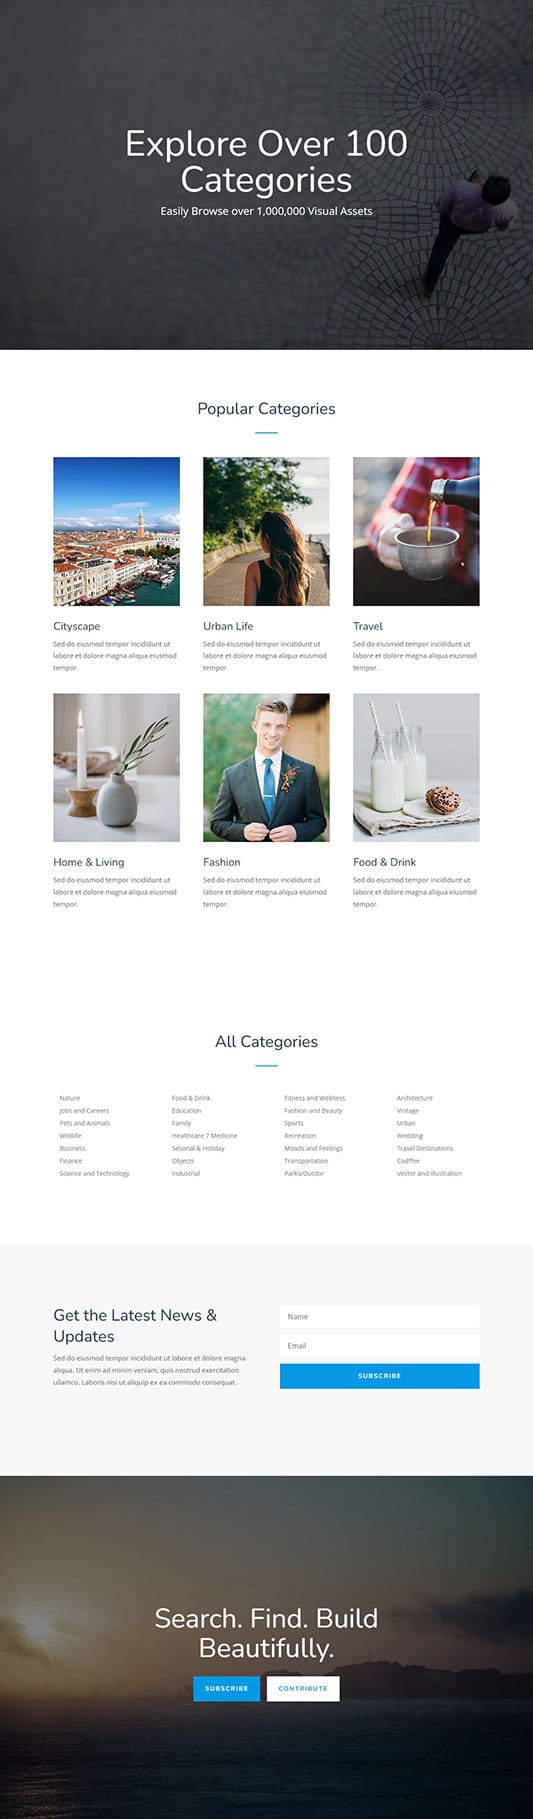 Photo Marketplace Categories Page